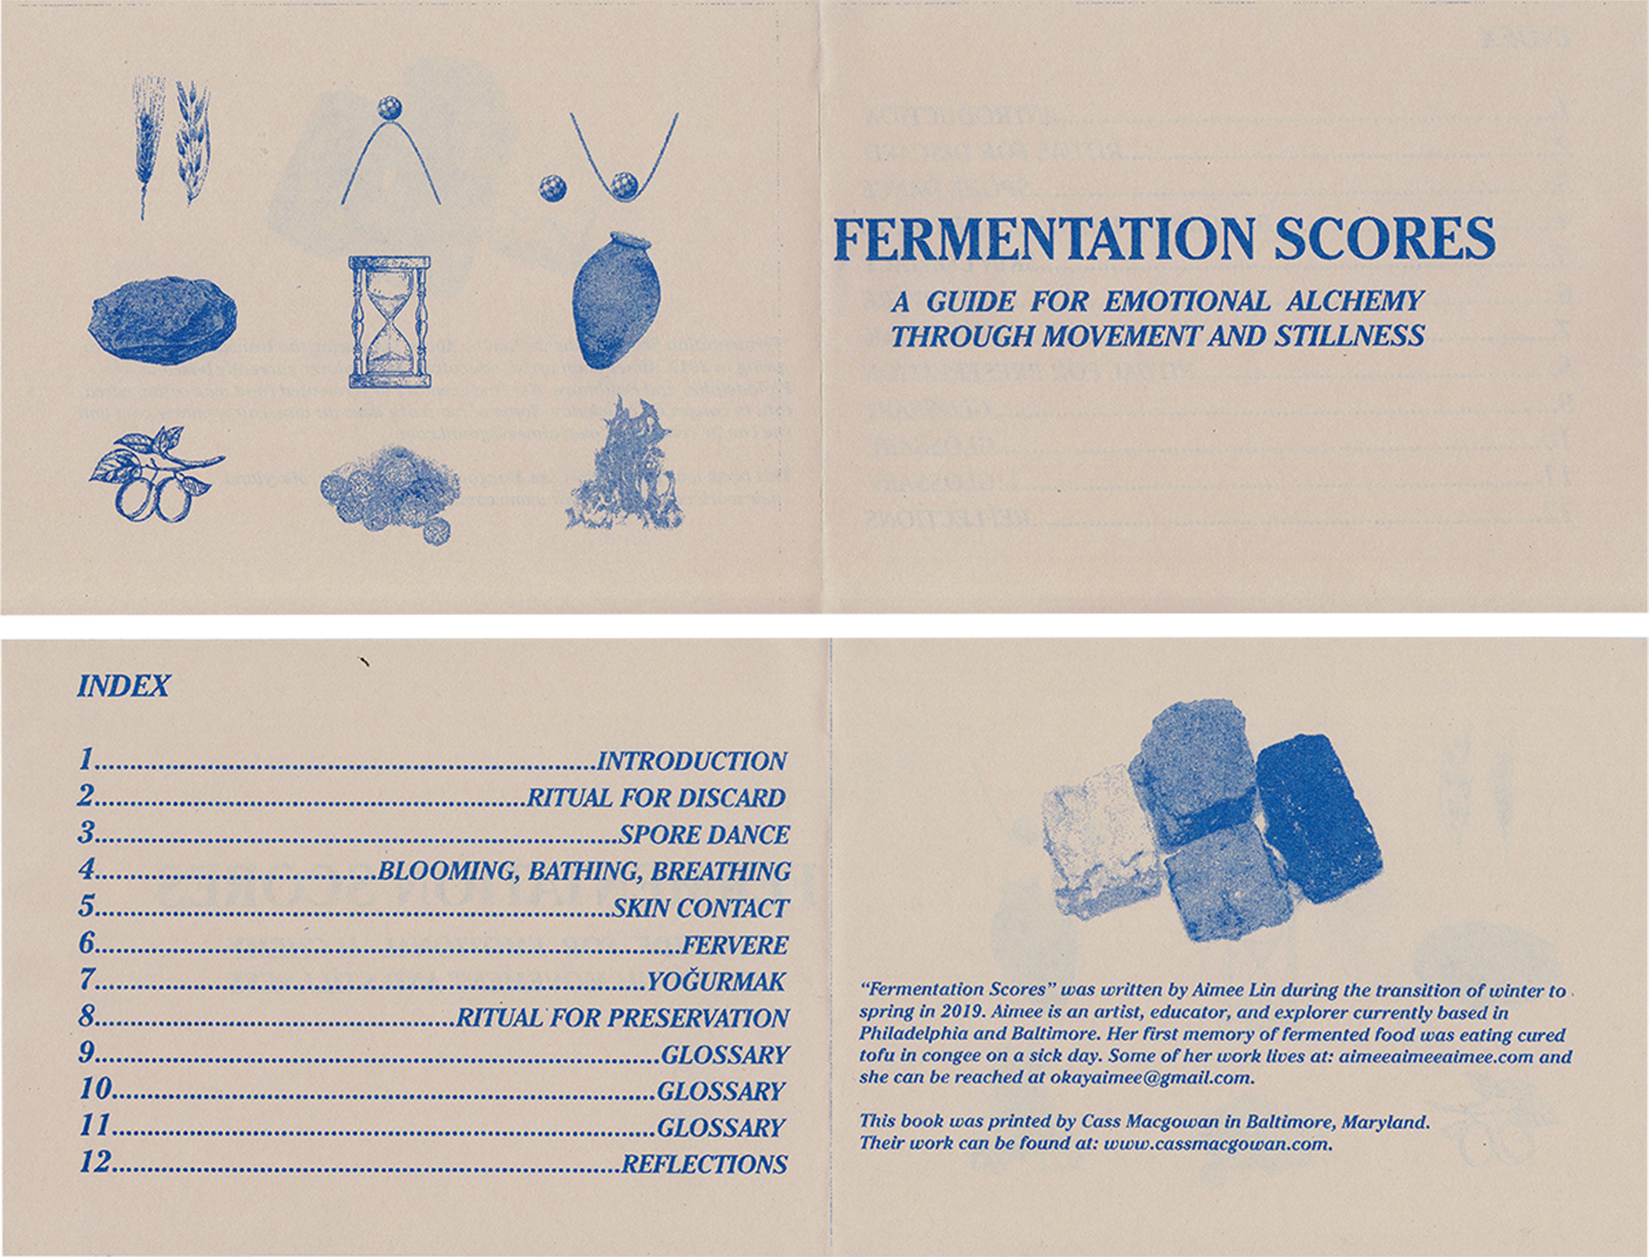   Fermentation Scores for Emotional Alchemy through Movement and Stillness   16 page risograph workbook with/ edition of 150 bound with copper thread  printed by  Cass Macgowan  please email okayaimeegmail.com if you would like a copy  (scores on nex